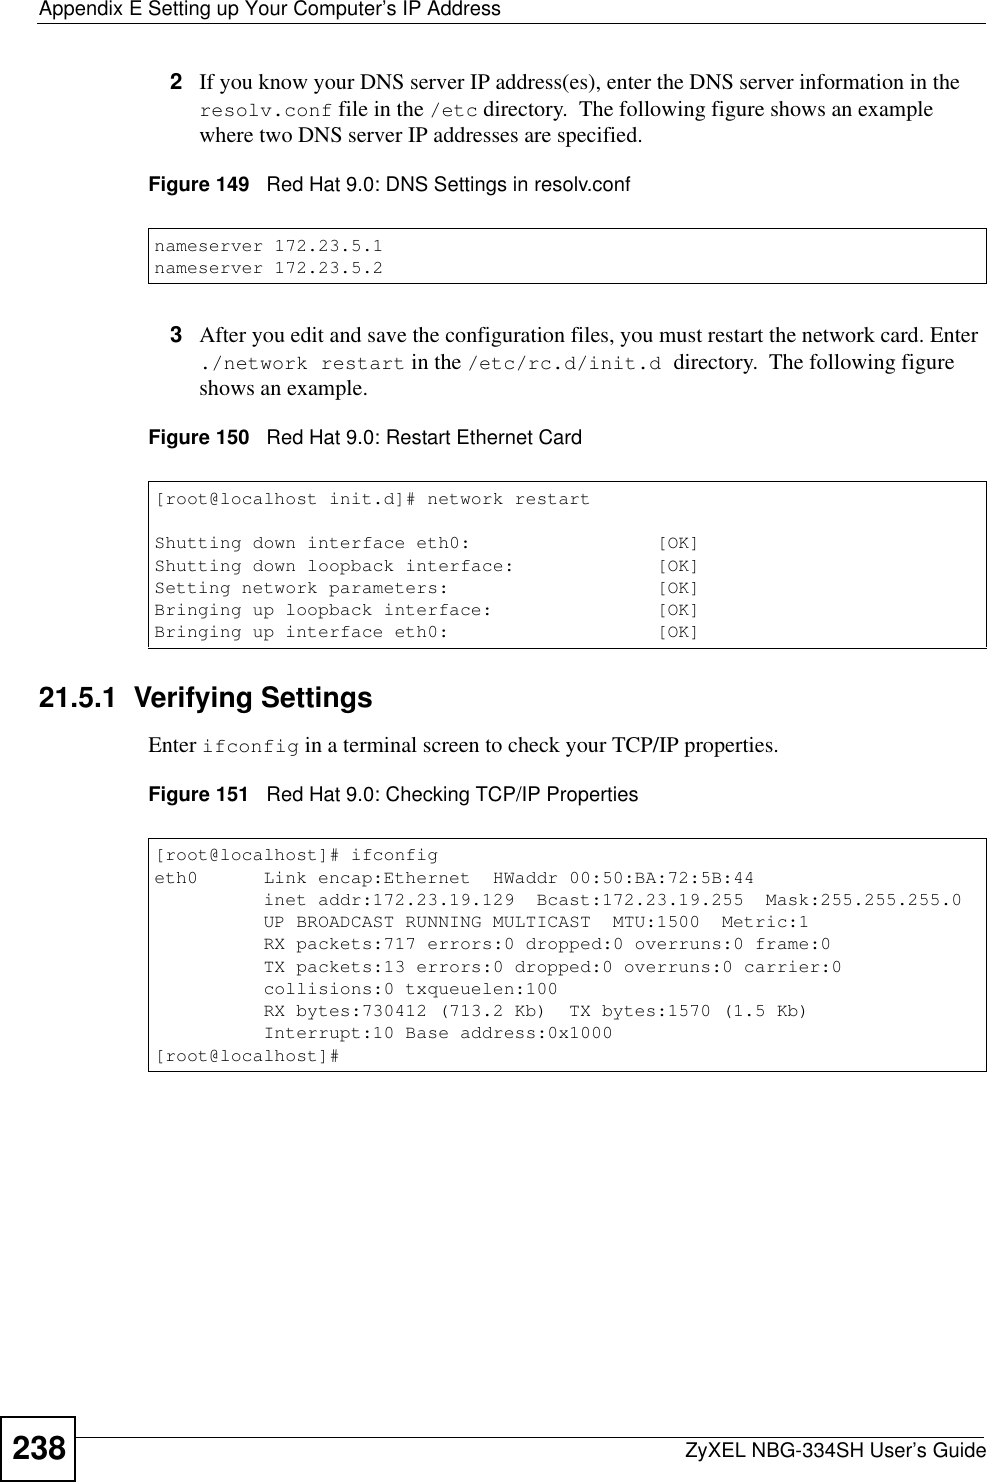 Appendix E Setting up Your Computer’s IP AddressZyXEL NBG-334SH User’s Guide2382If you know your DNS server IP address(es), enter the DNS server information in the resolv.conf file in the /etc directory.  The following figure shows an example where two DNS server IP addresses are specified.Figure 149   Red Hat 9.0: DNS Settings in resolv.conf   3After you edit and save the configuration files, you must restart the network card. Enter ./network restart in the /etc/rc.d/init.d directory.  The following figure shows an example.Figure 150   Red Hat 9.0: Restart Ethernet Card  21.5.1  Verifying SettingsEnter ifconfig in a terminal screen to check your TCP/IP properties.  Figure 151   Red Hat 9.0: Checking TCP/IP Properties  nameserver 172.23.5.1nameserver 172.23.5.2[root@localhost init.d]# network restartShutting down interface eth0:                 [OK]Shutting down loopback interface:             [OK]Setting network parameters:                   [OK]Bringing up loopback interface:               [OK]Bringing up interface eth0:                   [OK][root@localhost]# ifconfig eth0      Link encap:Ethernet  HWaddr 00:50:BA:72:5B:44            inet addr:172.23.19.129  Bcast:172.23.19.255  Mask:255.255.255.0          UP BROADCAST RUNNING MULTICAST  MTU:1500  Metric:1          RX packets:717 errors:0 dropped:0 overruns:0 frame:0          TX packets:13 errors:0 dropped:0 overruns:0 carrier:0          collisions:0 txqueuelen:100           RX bytes:730412 (713.2 Kb)  TX bytes:1570 (1.5 Kb)          Interrupt:10 Base address:0x1000 [root@localhost]#